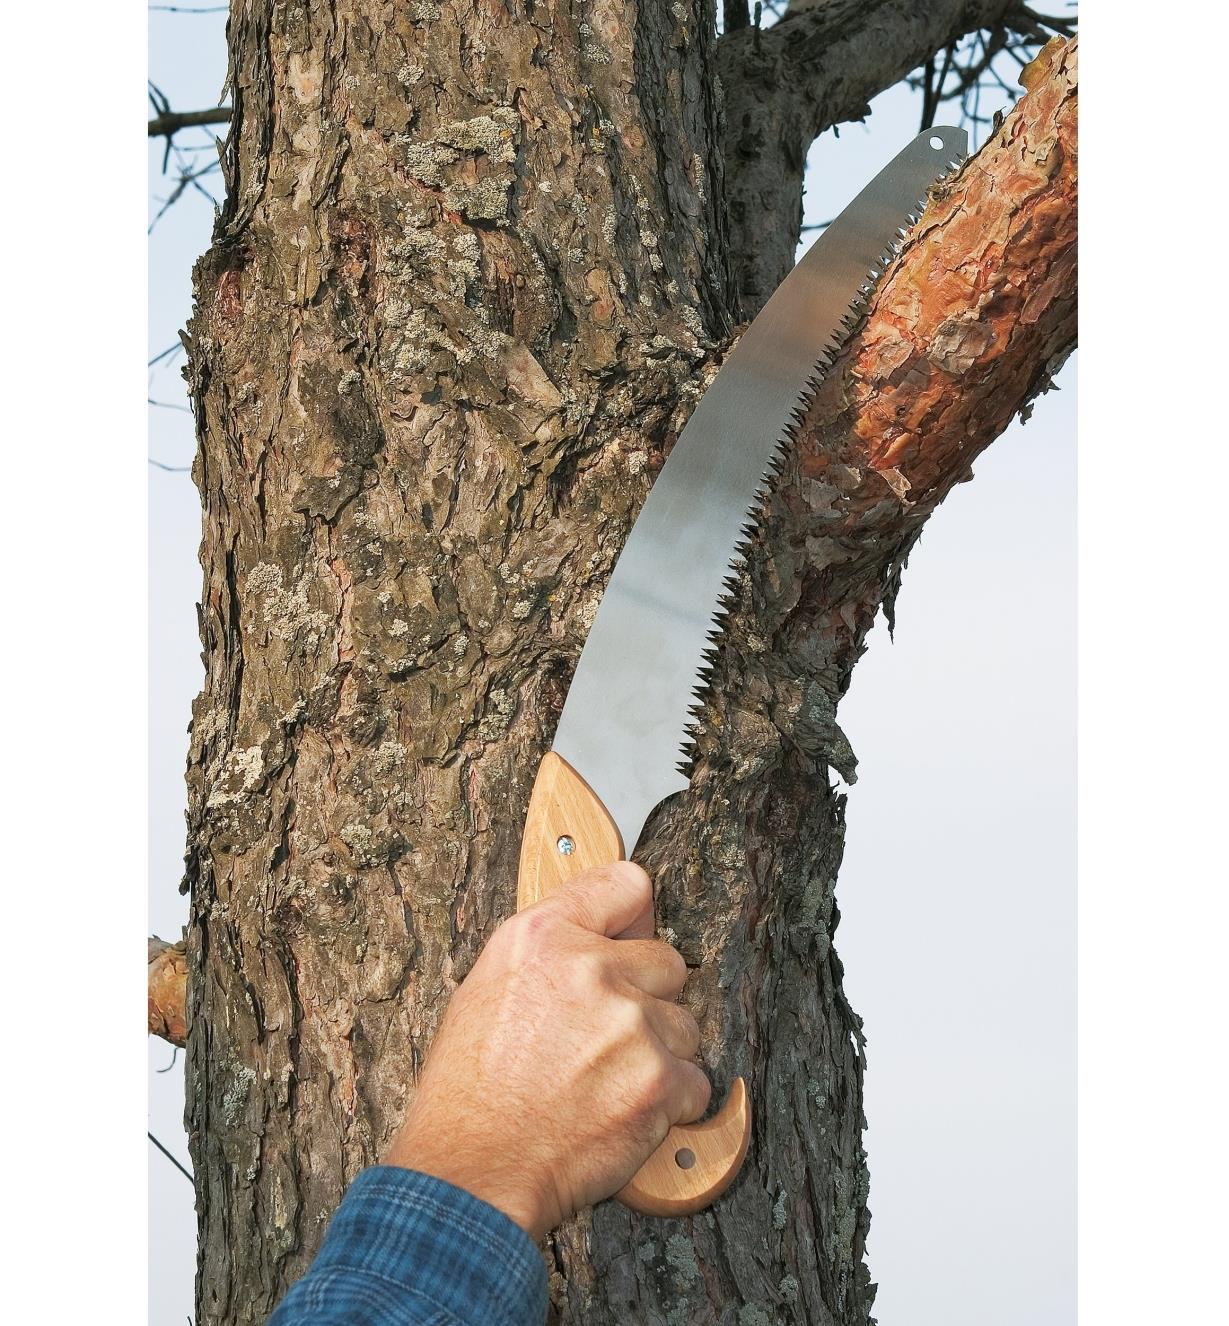 Using the pruning saw to cut through a tree branch